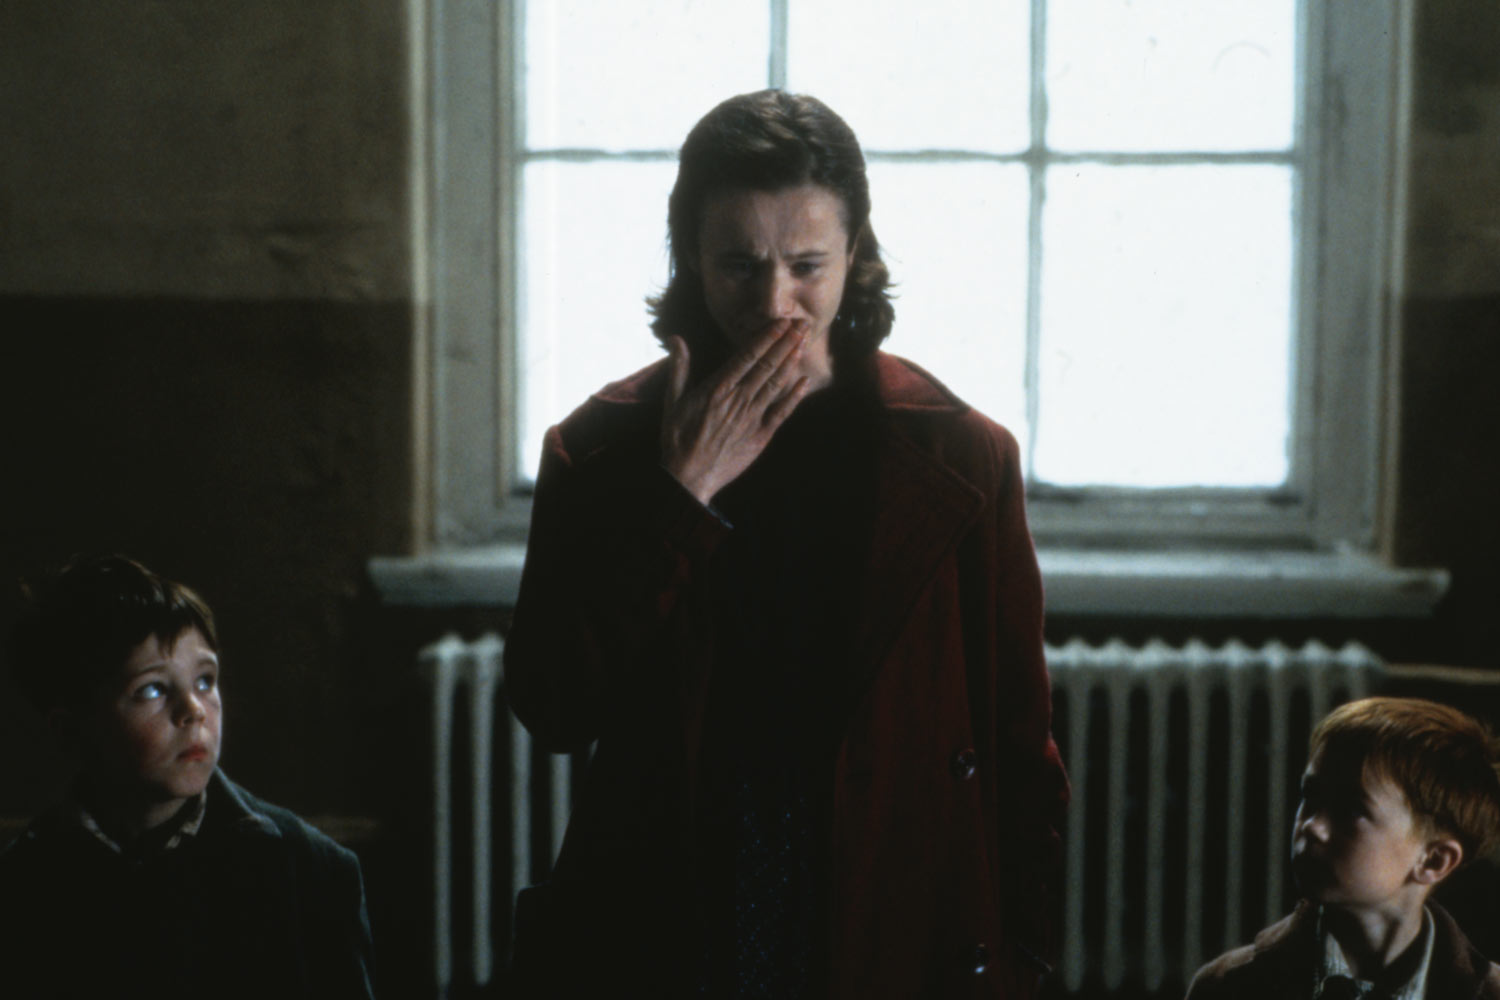 Emily Watson in scene from Angela's Ashes